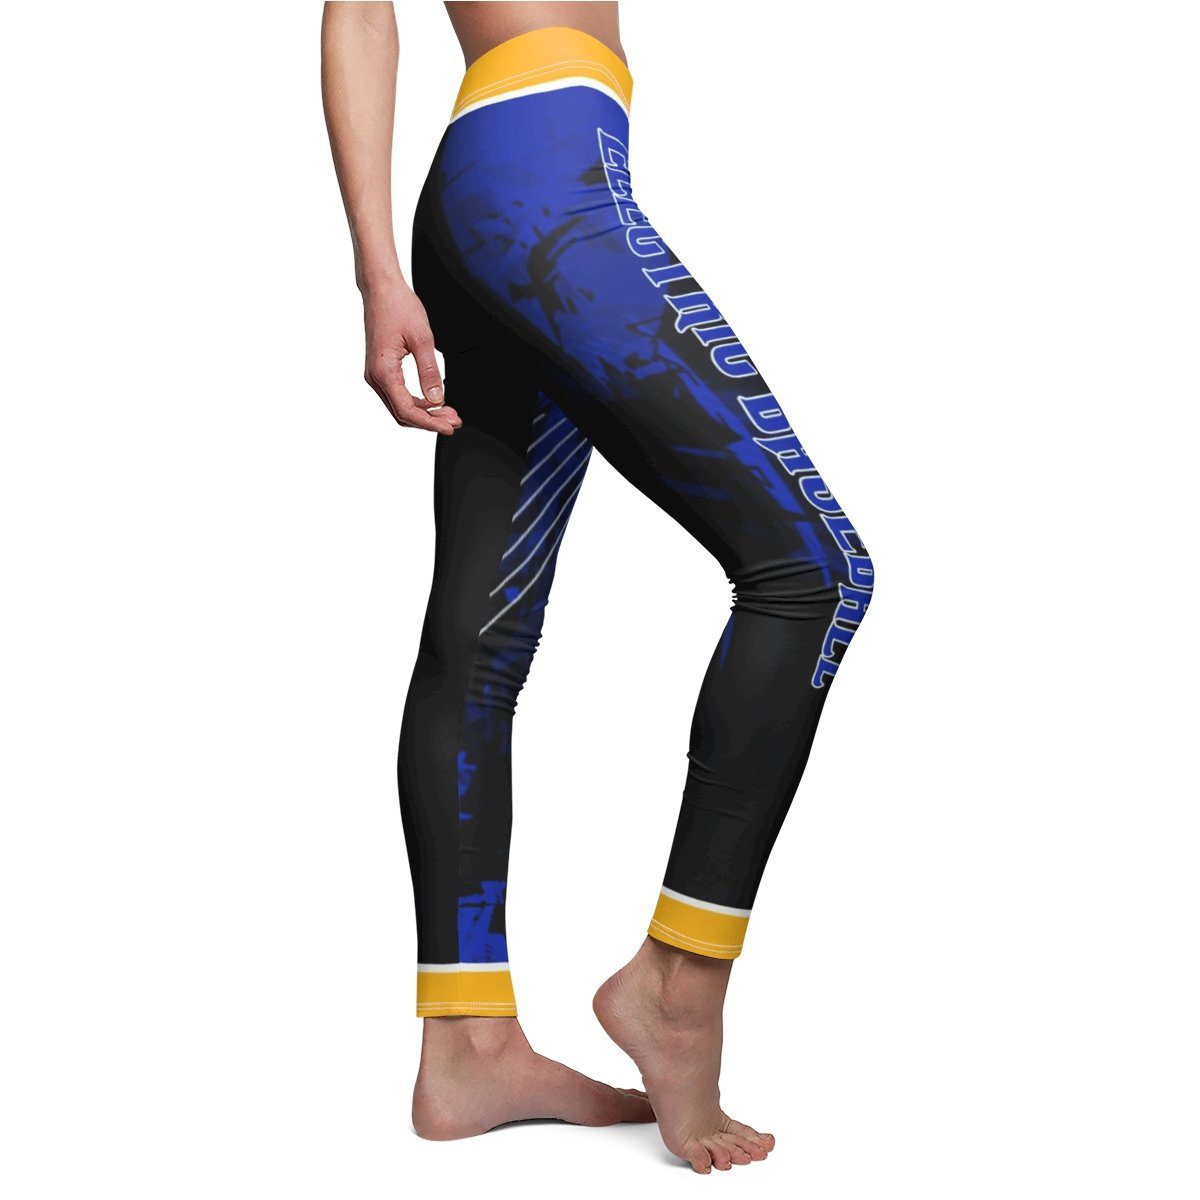 Breaker - V.1 - Extreme Sportswear Cut & Sew Leggings Template-Photoshop Template - Photo Solutions